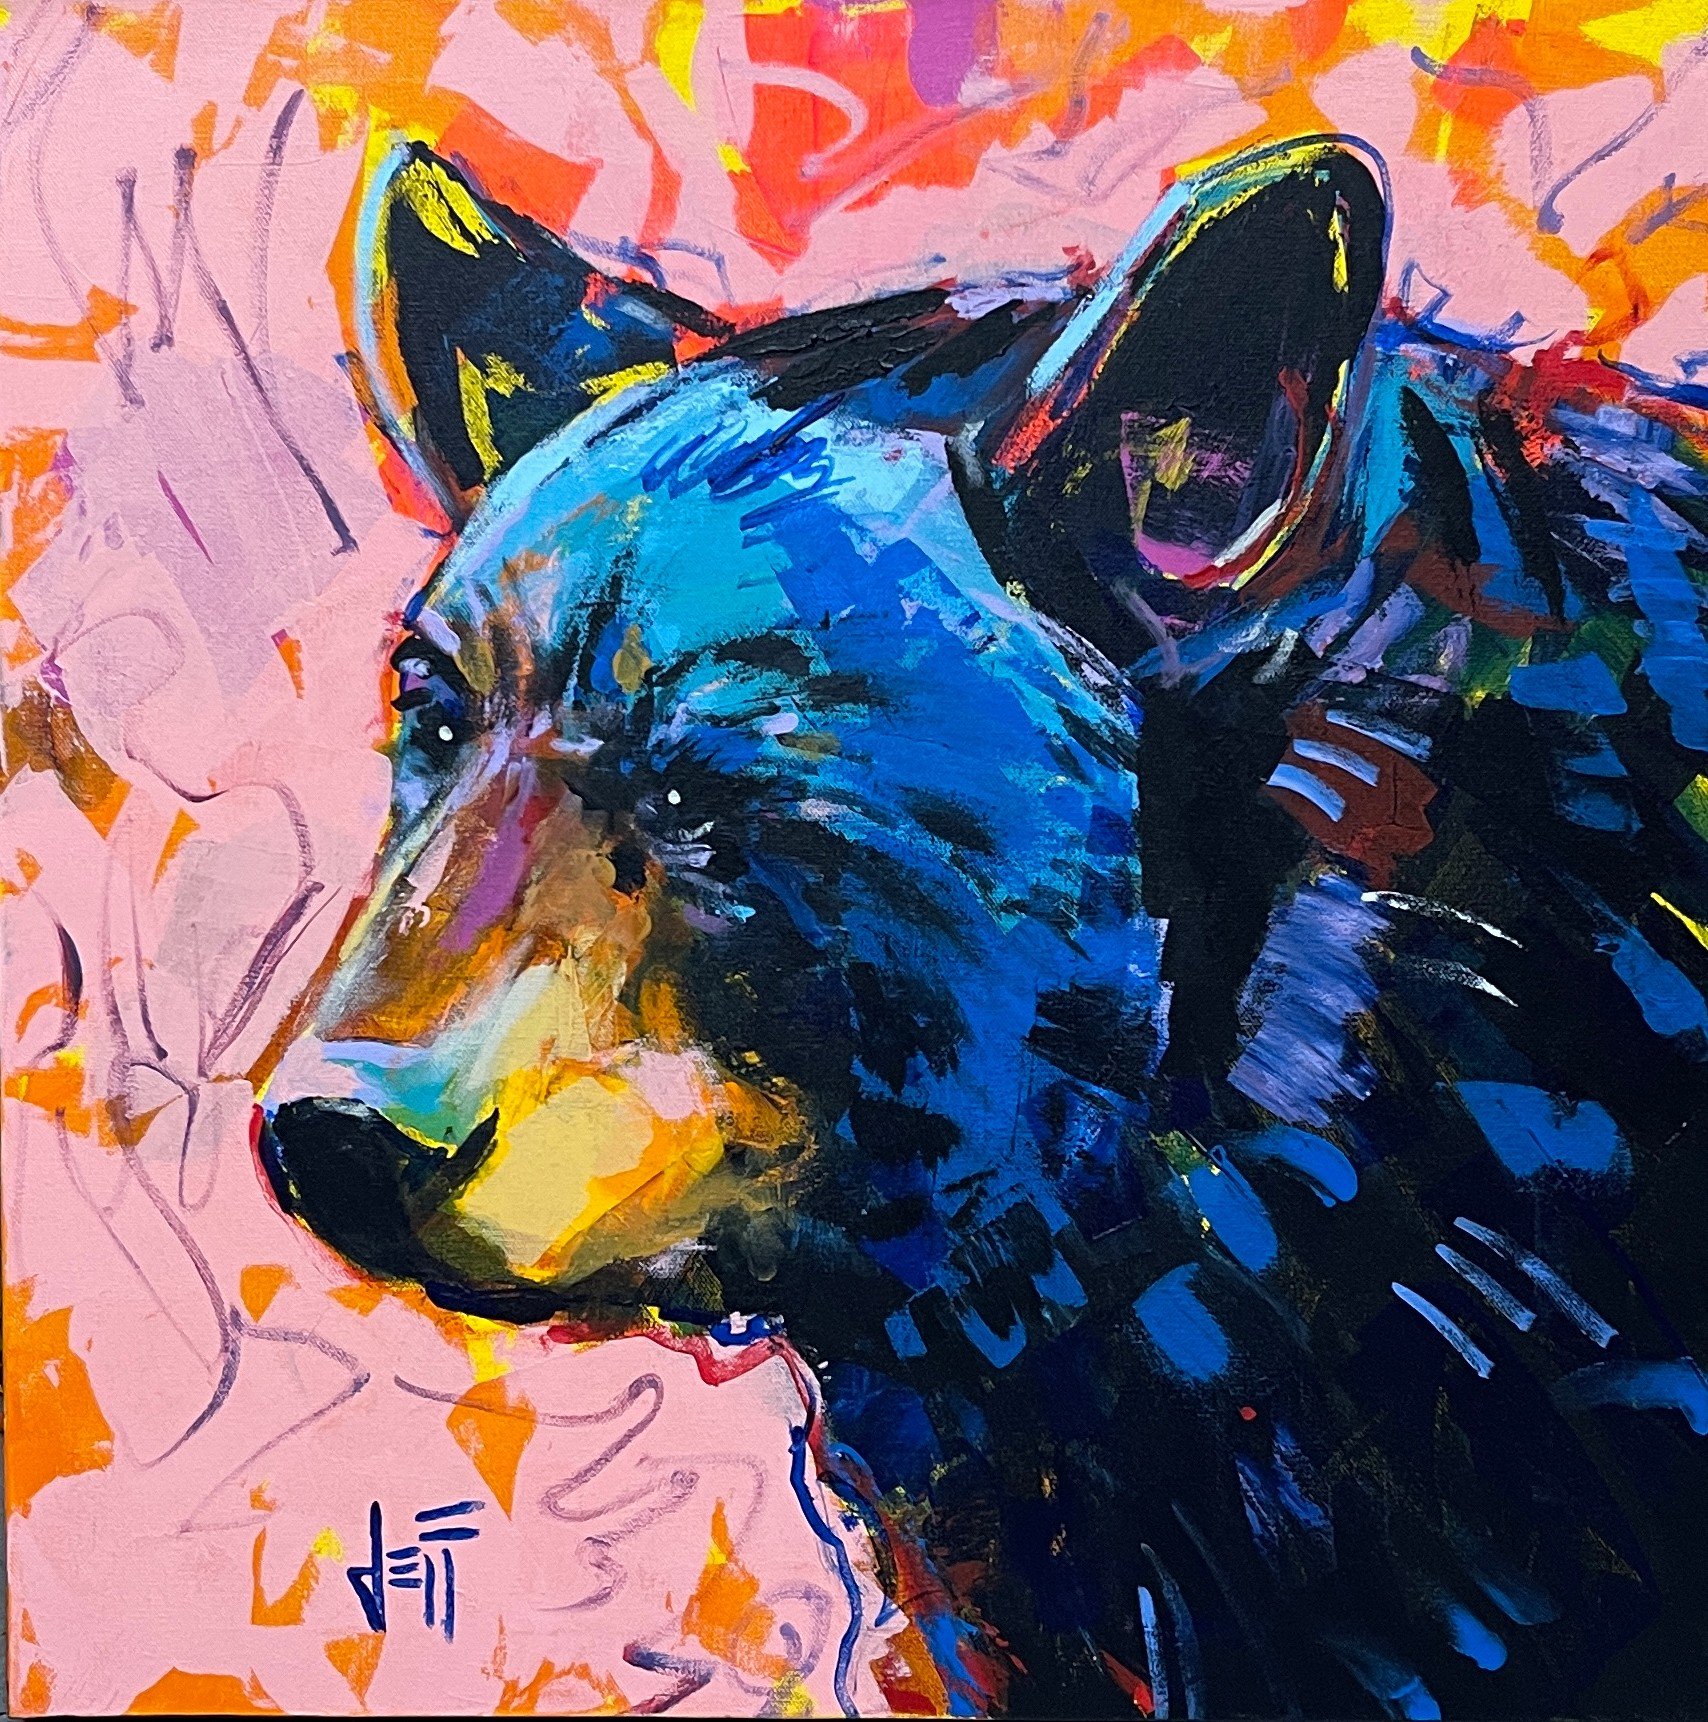  Bearly Blue-acrylic on canvas 24” x 24”  Sivertson Gallery 